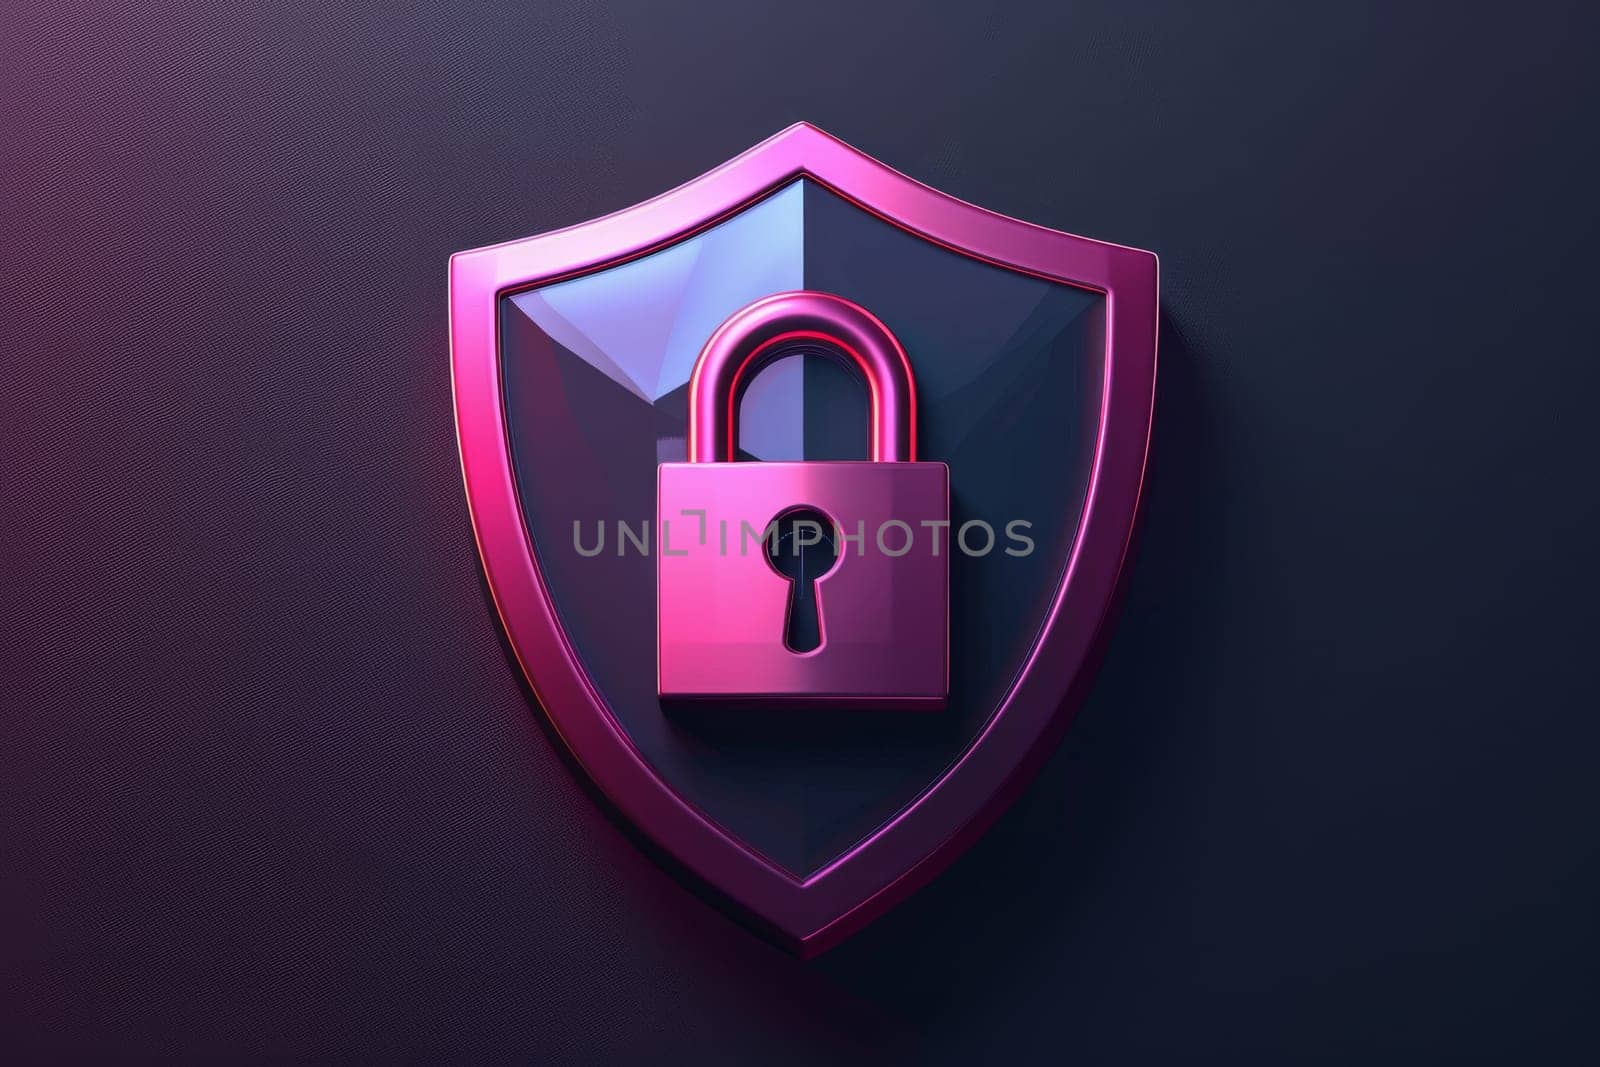 A pink shield with a keyhole in the middle. The shield is a symbol of protection and security